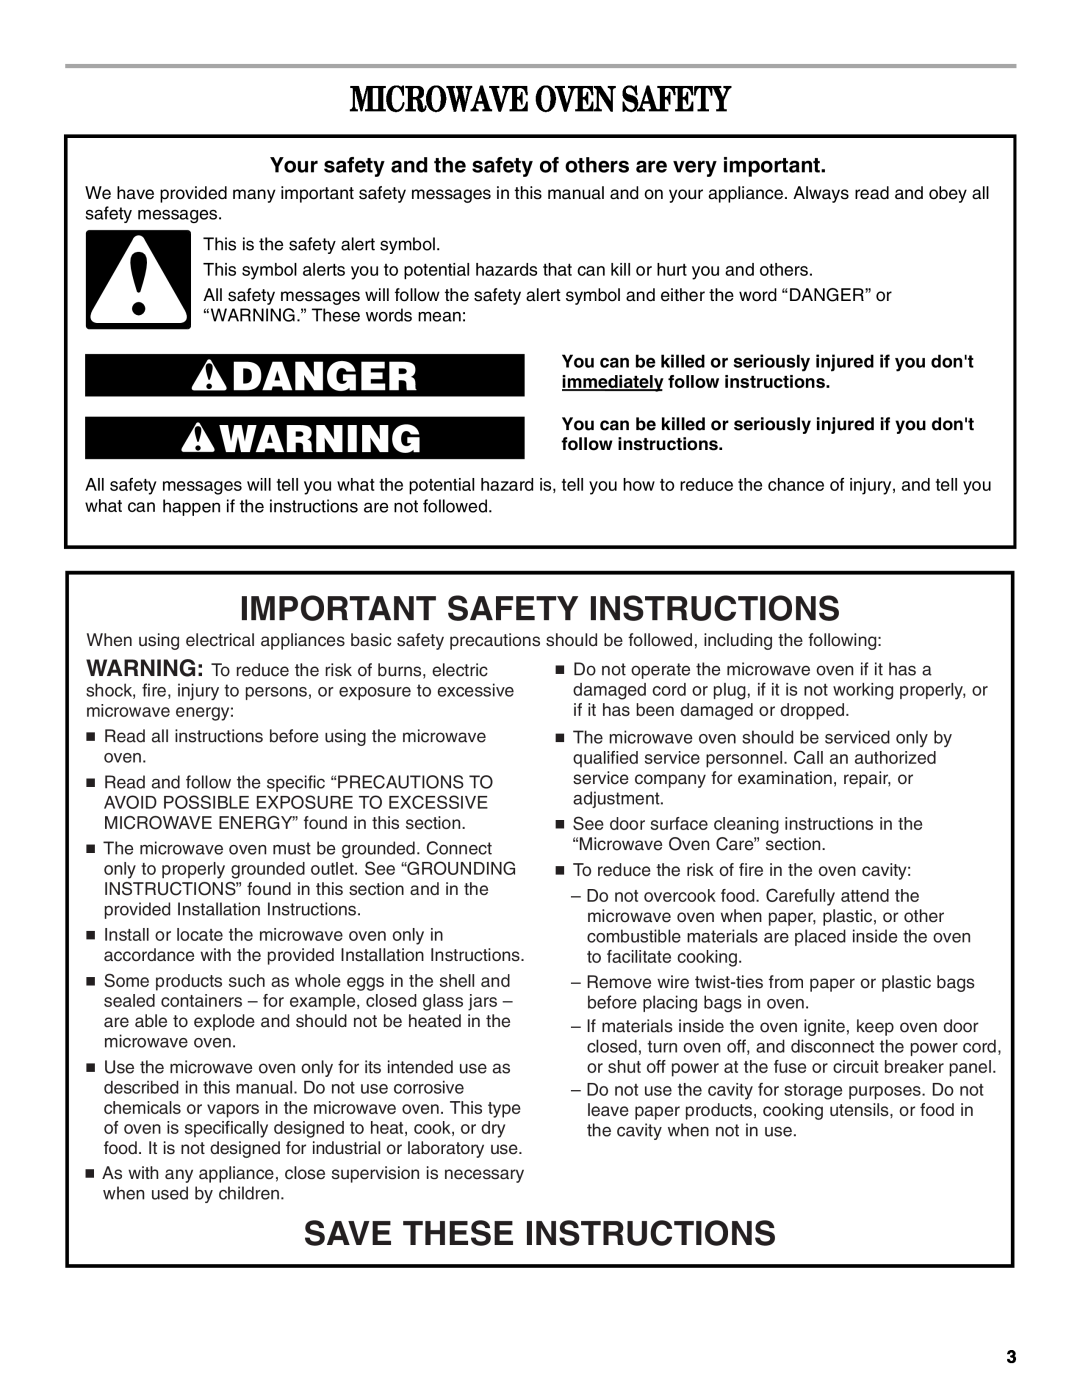 Inglis Home Appliances IOR14XR manual Microwave Oven Safety, Important Safety Instructions, Save These Instructions 